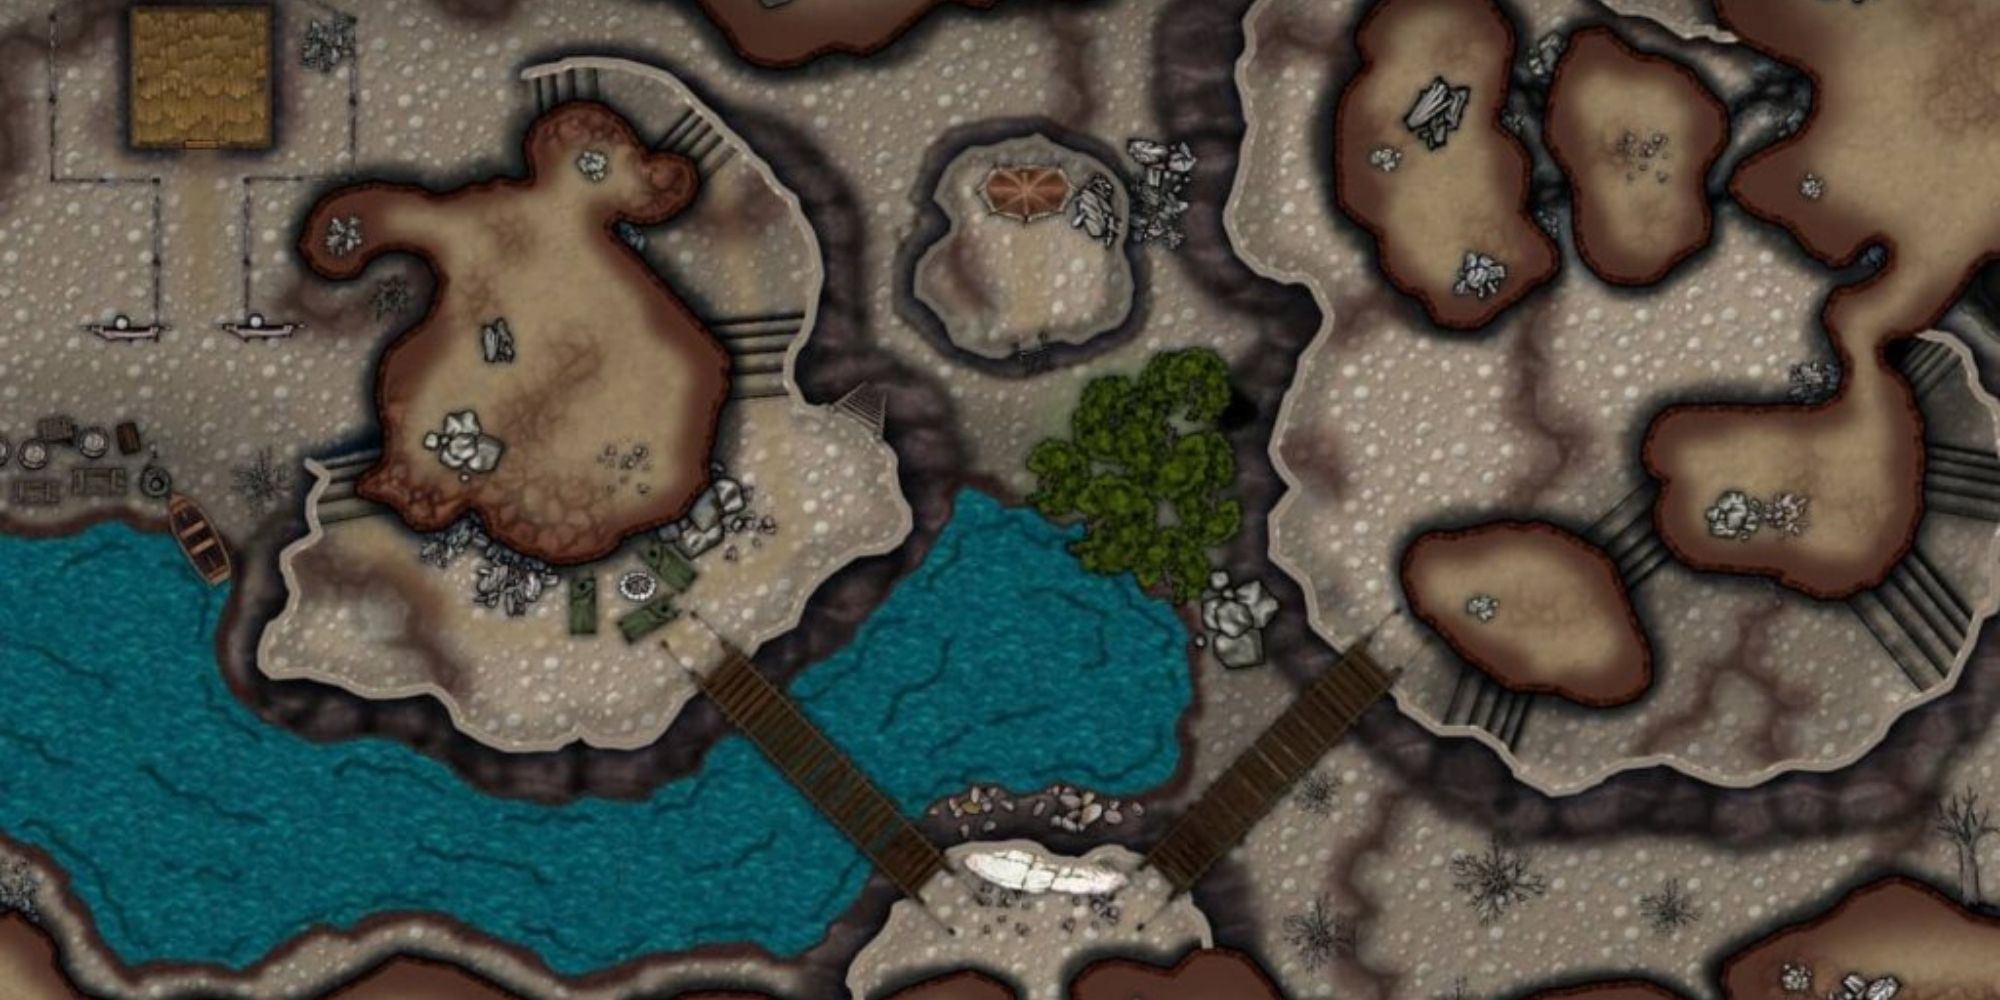 Canyon dungeon map complete with a dusty desert feel and some skeletons